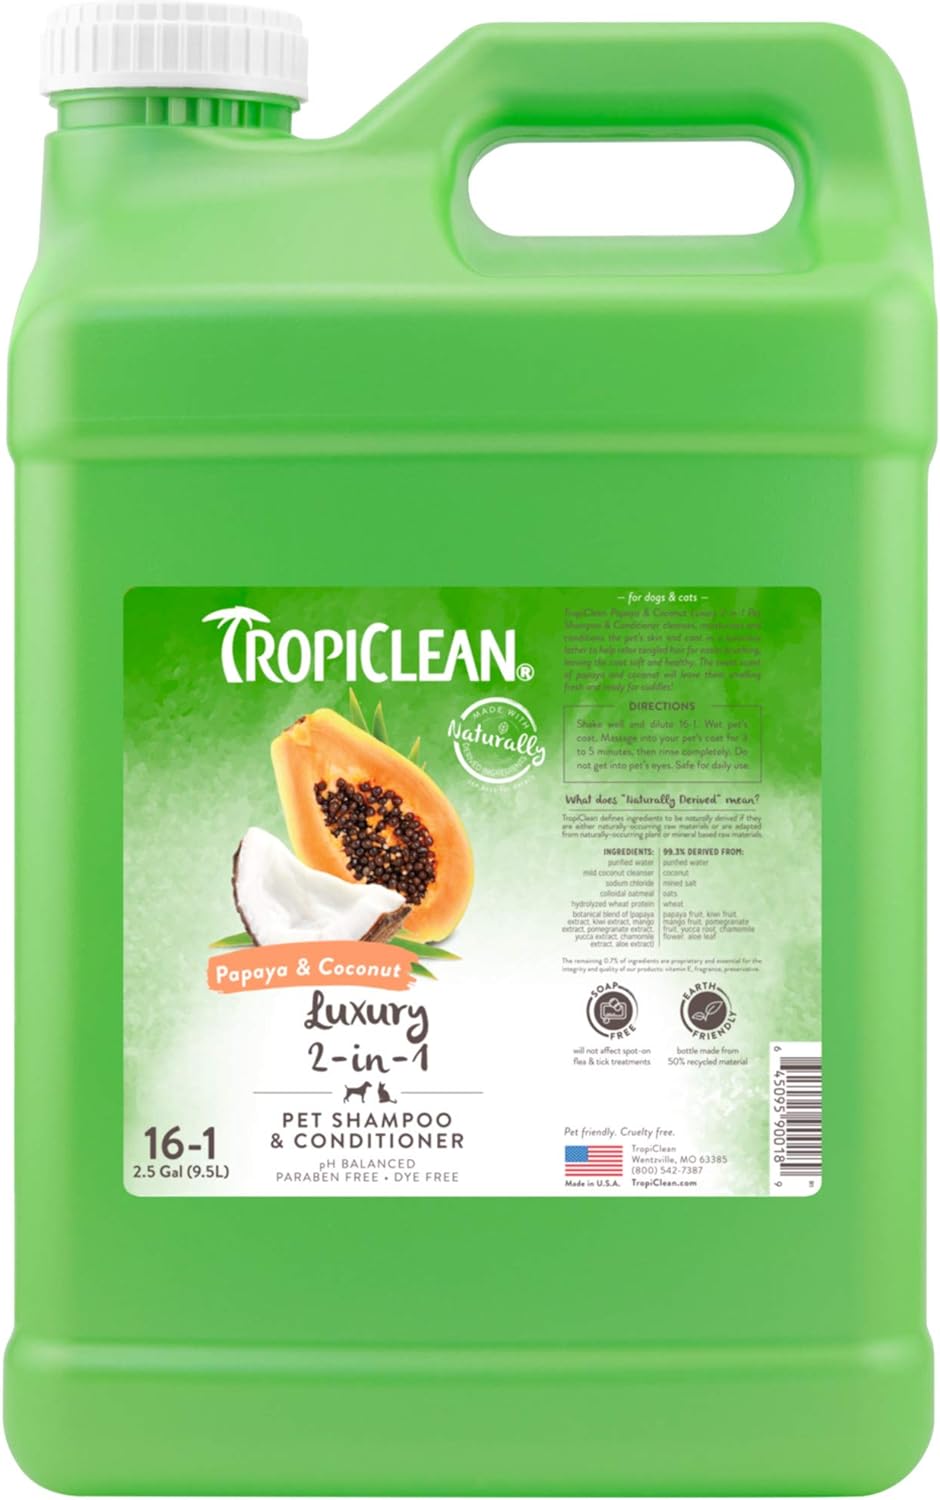 TropiClean 2-in-1 Papaya & Coconut Dog Shampoo and Conditioner | Natural Pet Shampoo Derived from Natural Ingredients | Cat Friendly | Made in the USA | 2.5 gallon